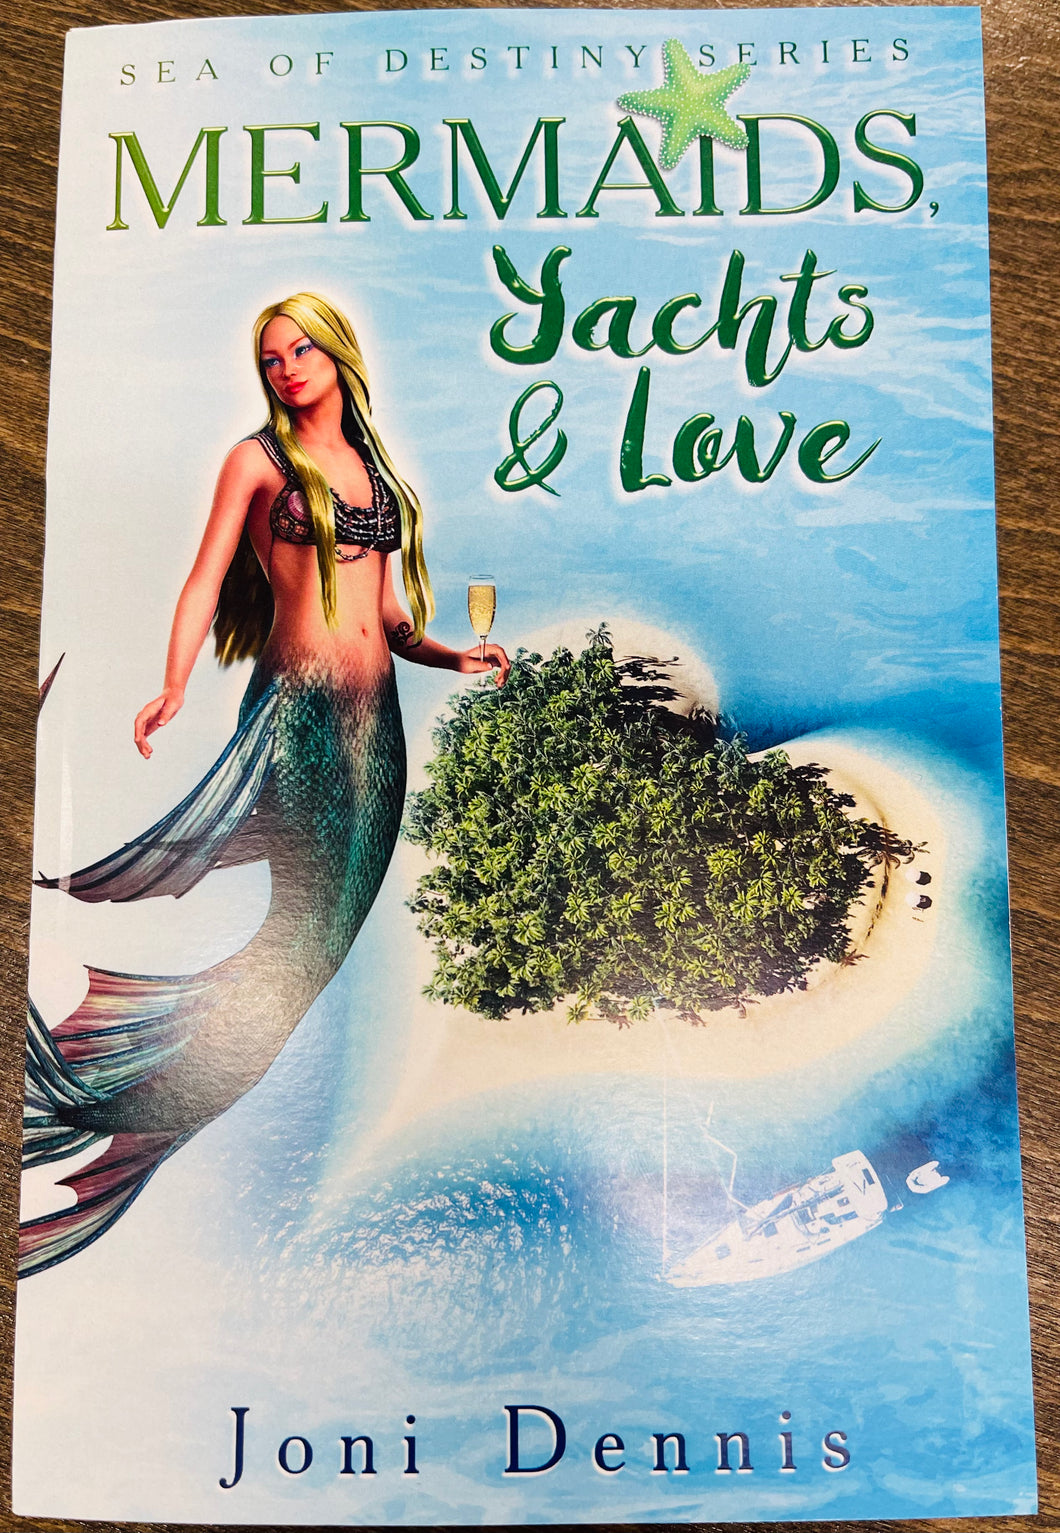 Local Author Mermaids, Yachts & Love Book